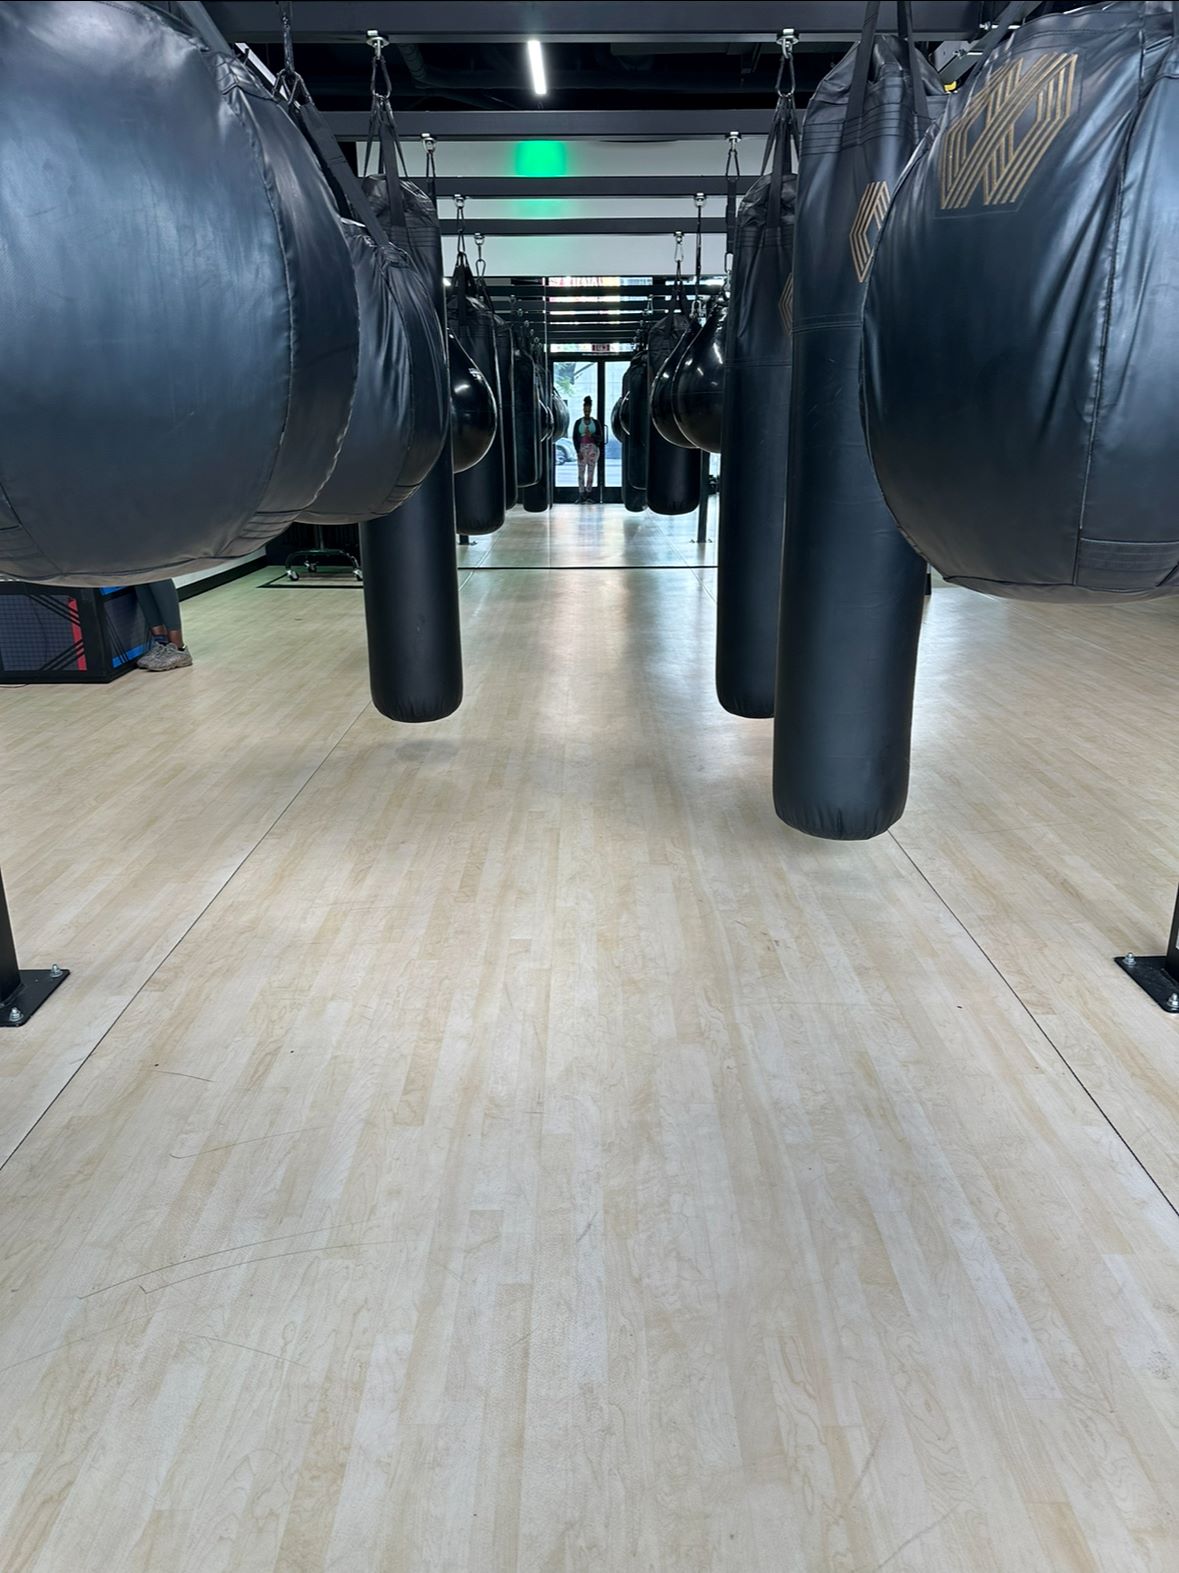 An image of the different punching bags at Mayweather Boxing and Fitness.